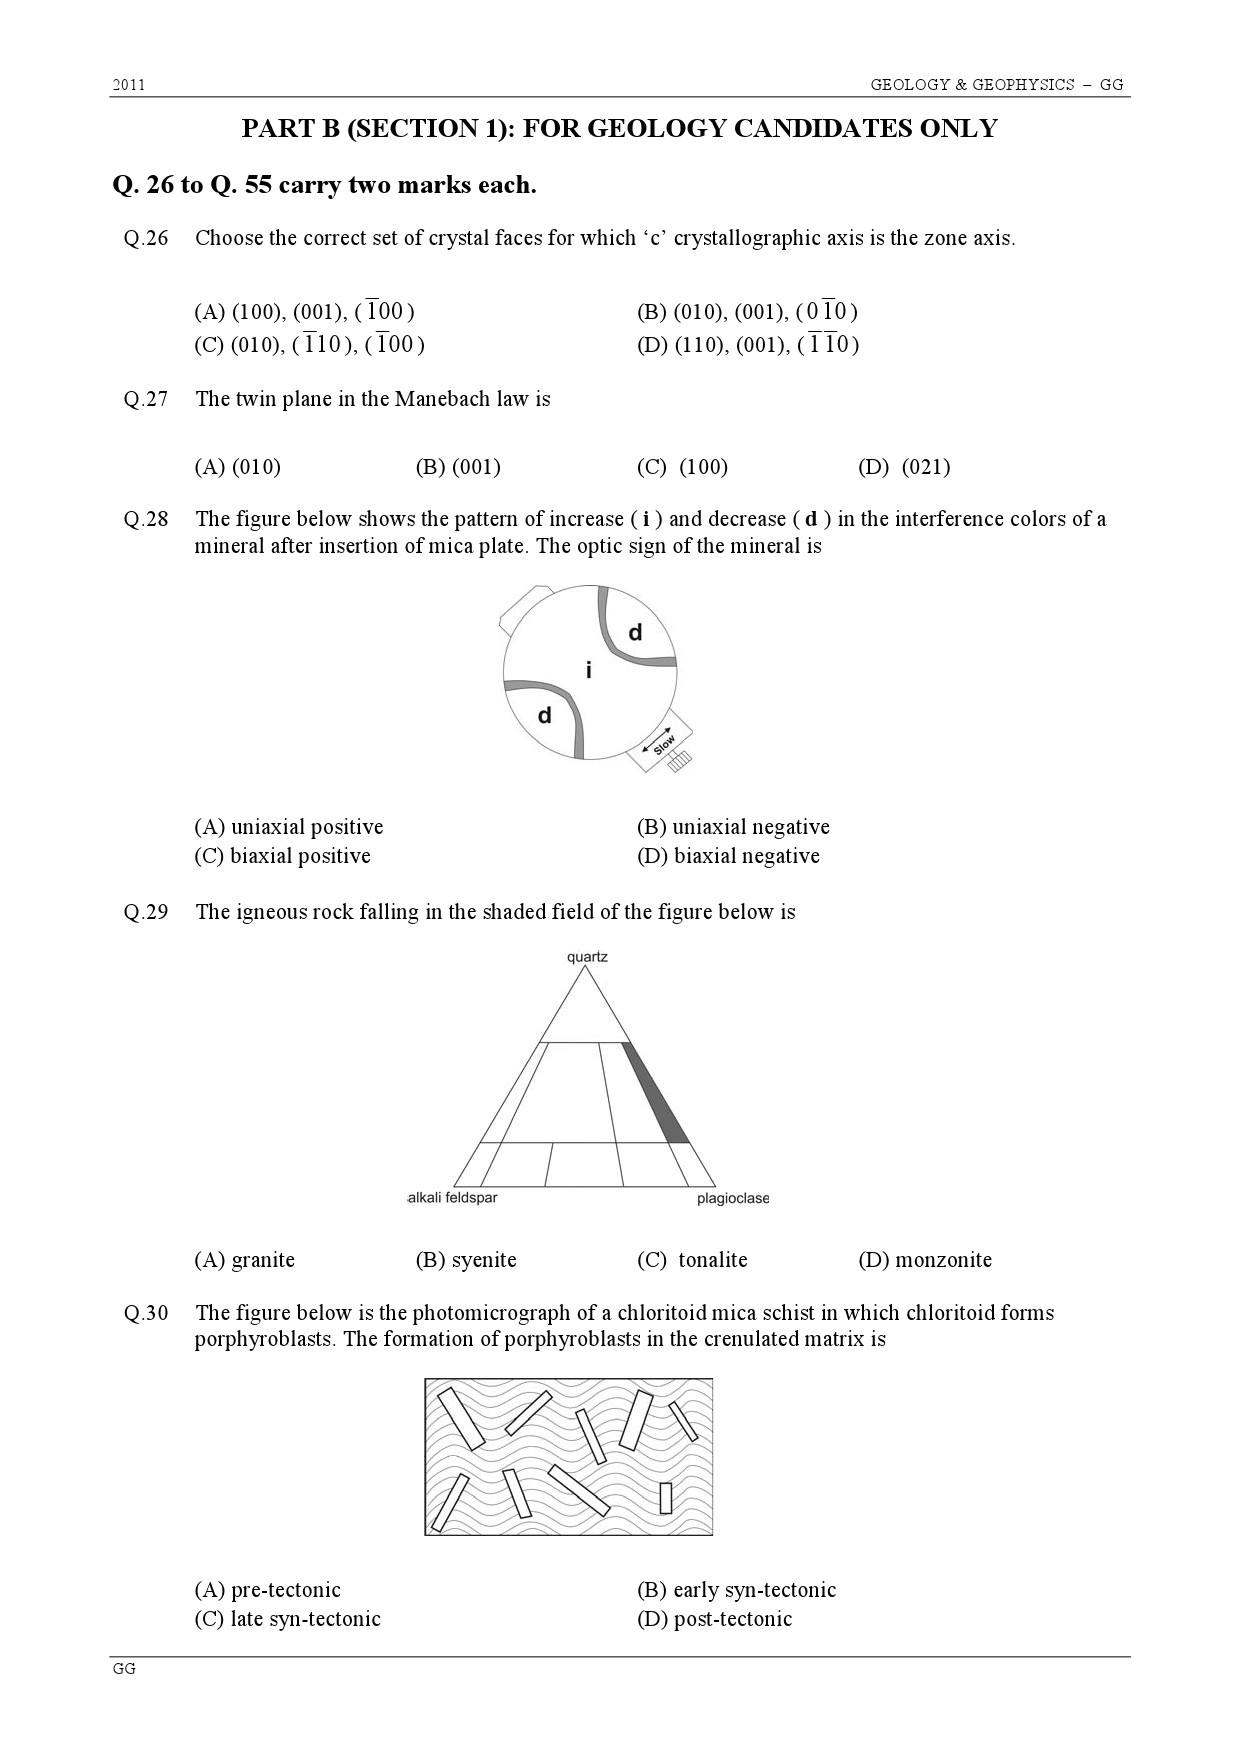 GATE Exam Question Paper 2011 Geology and Geophysics 5